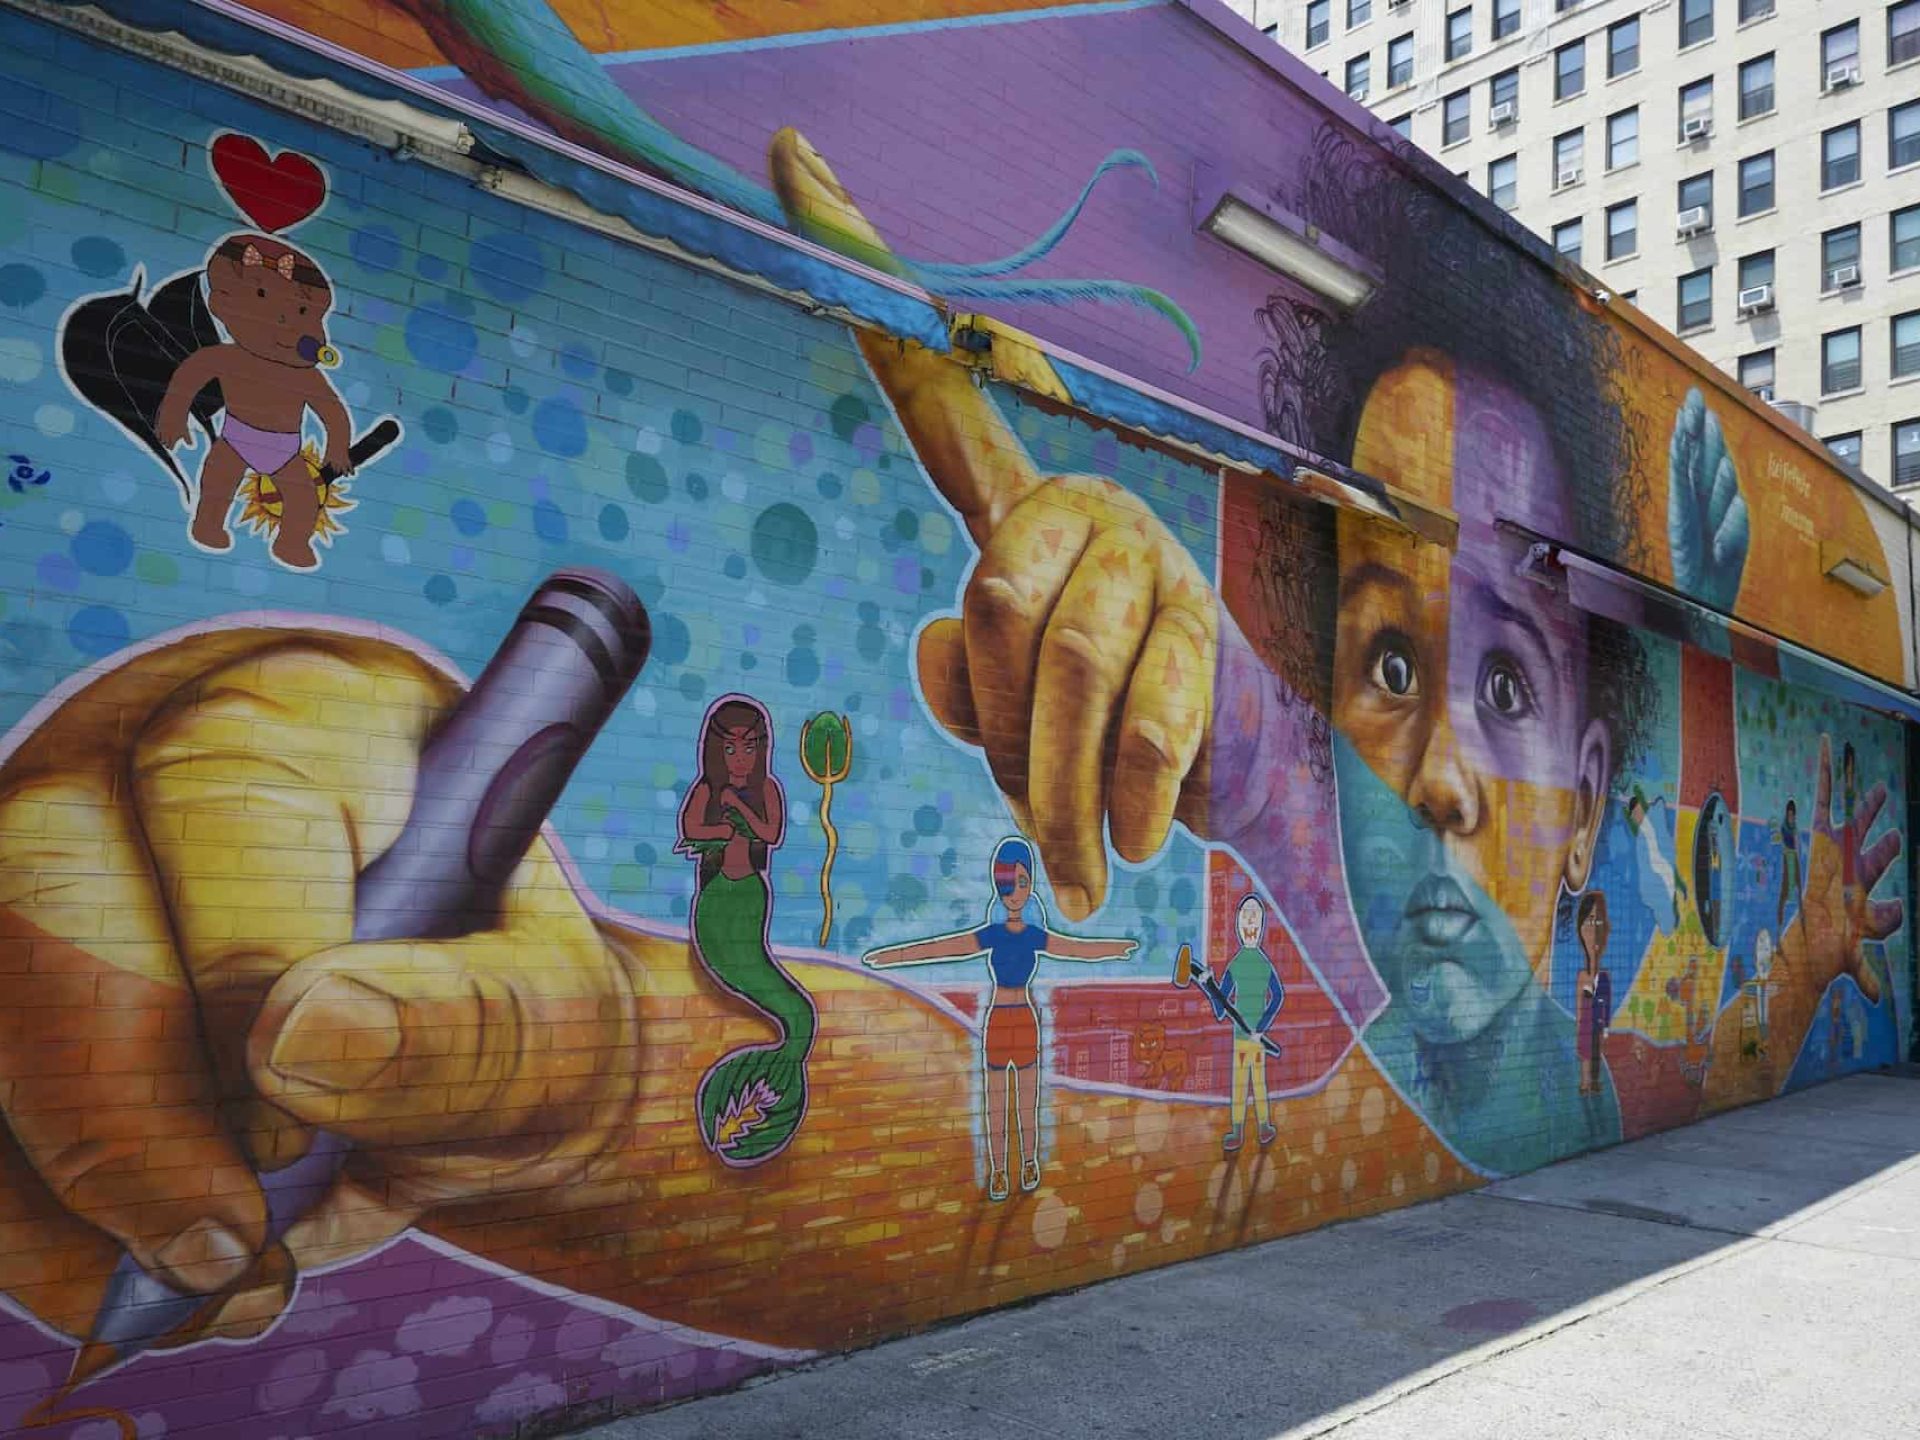 A street mural painted on the side of a brick building. Picture of a babies face, children's hands and other characters.